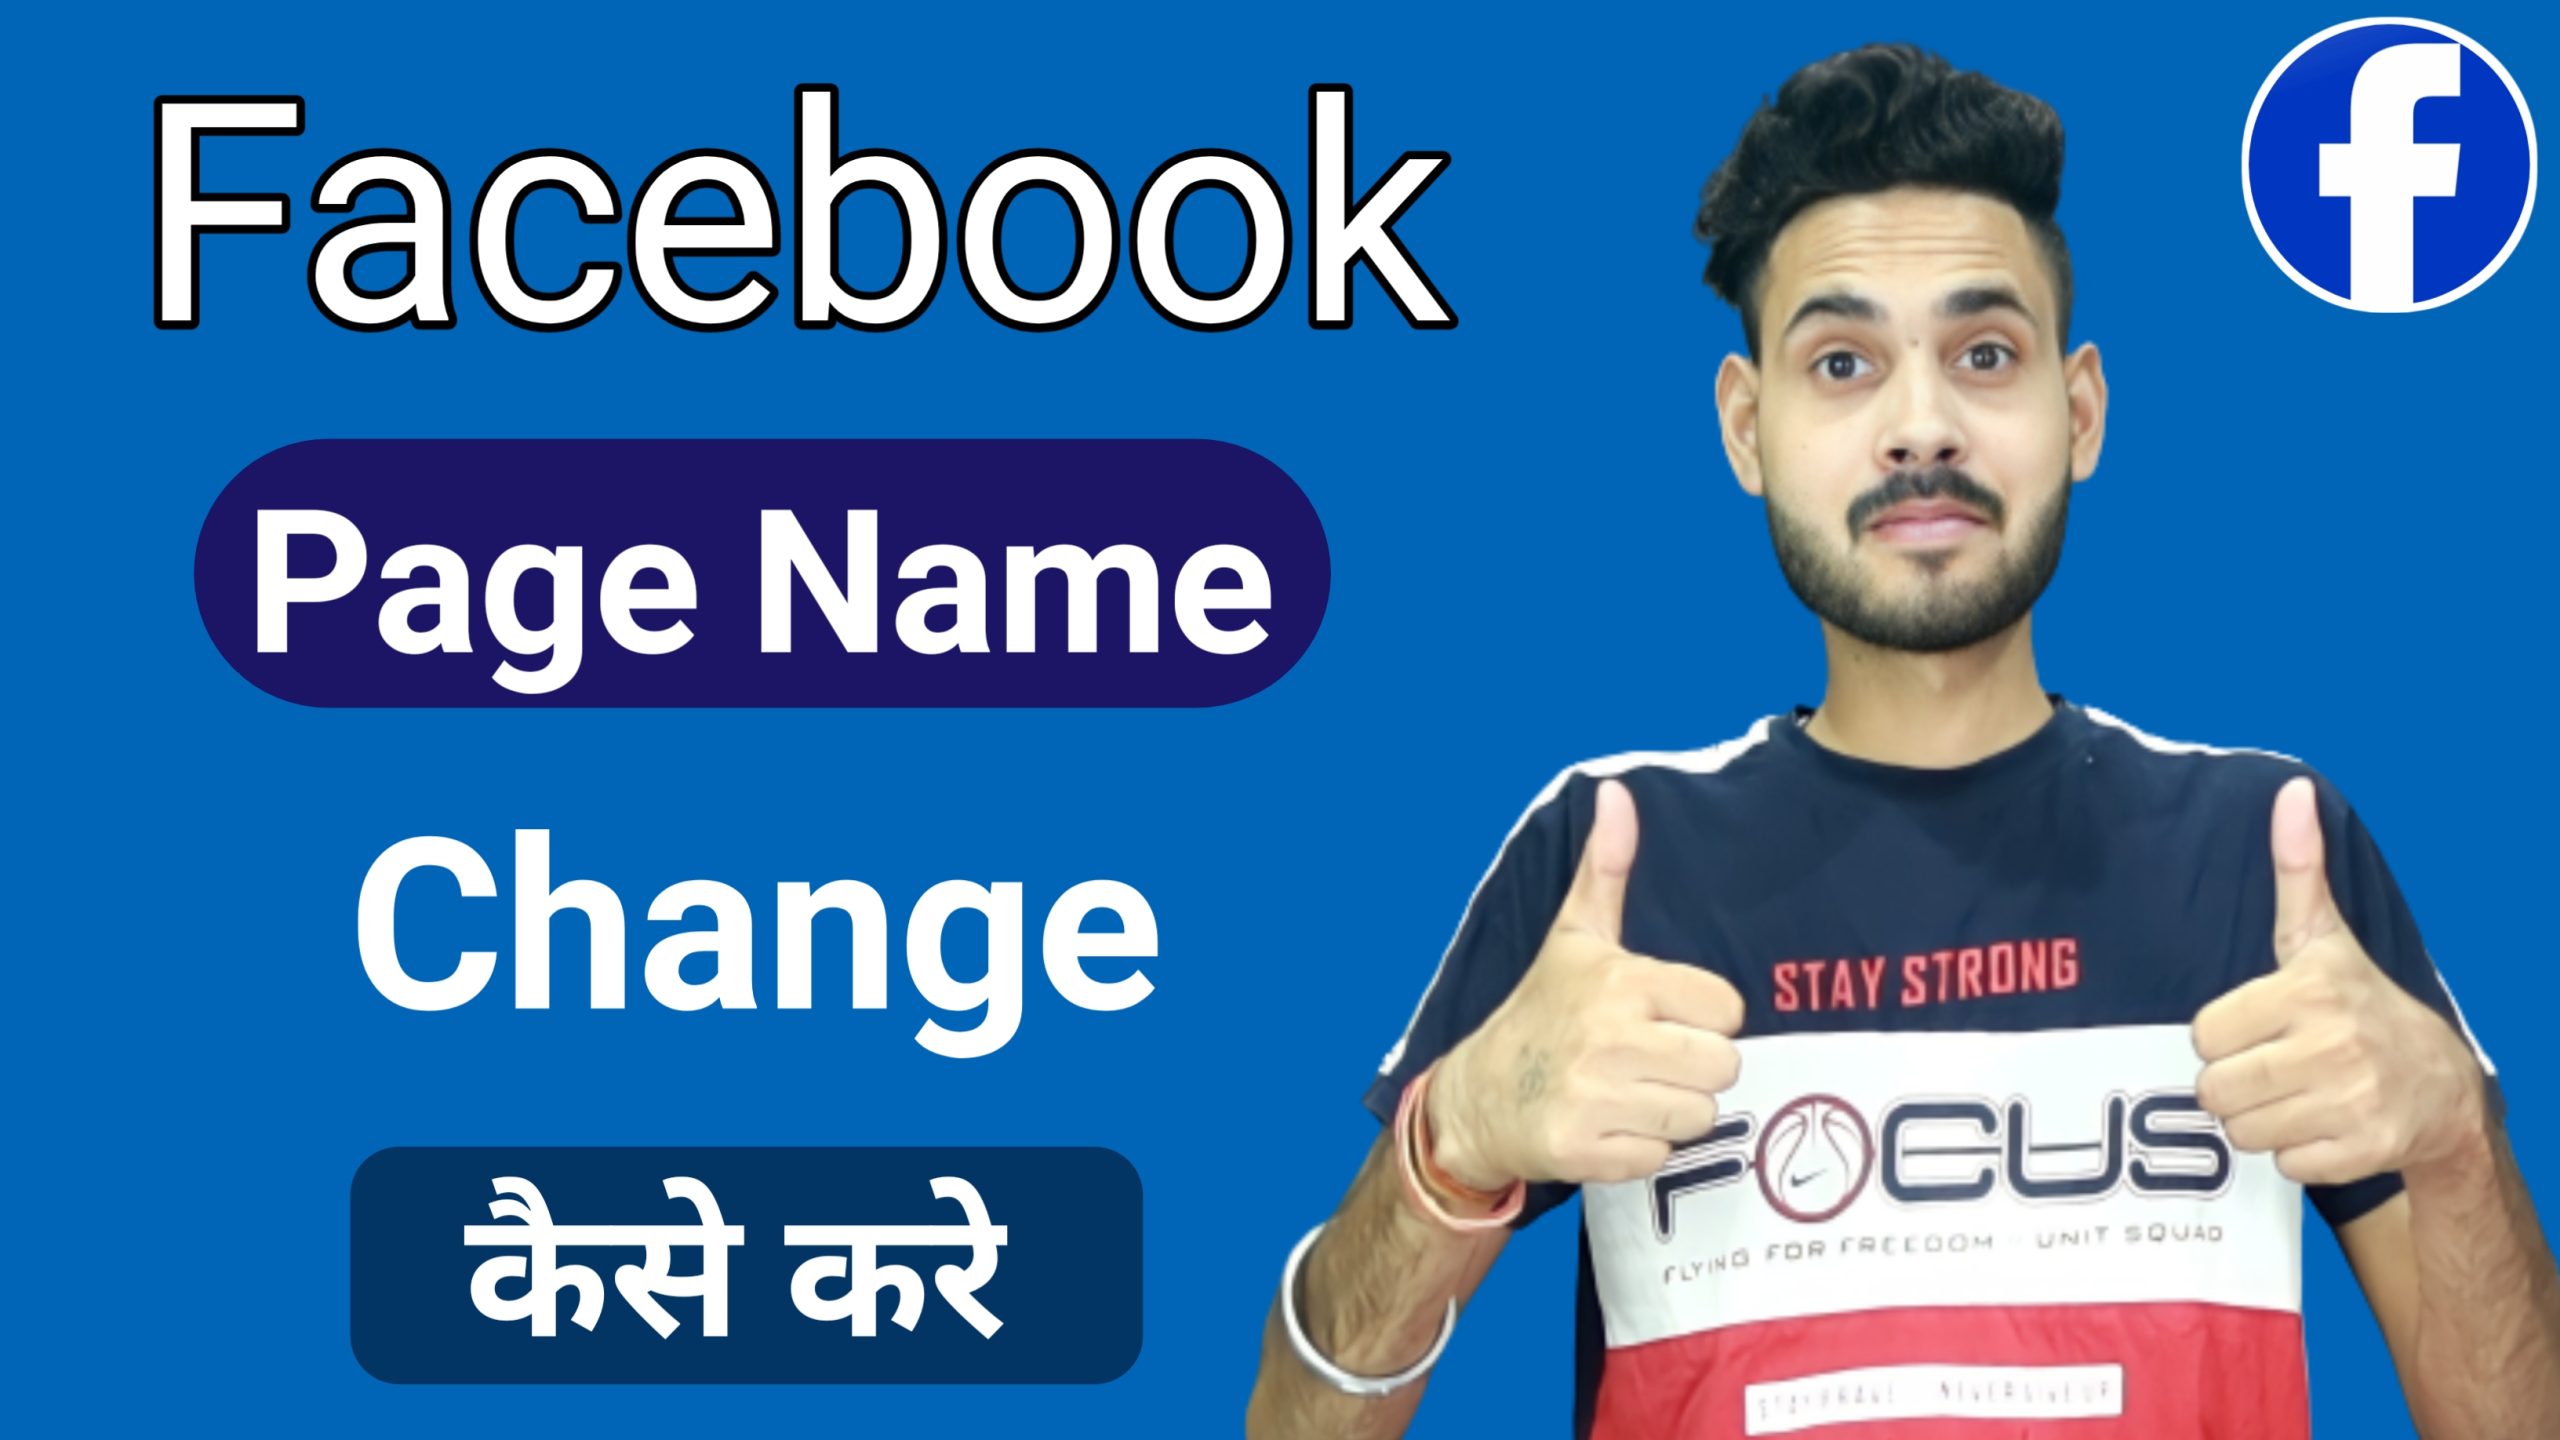 Facebook Page Name Change Kaise Kare 2023 | How to Change Facebook Page Name?